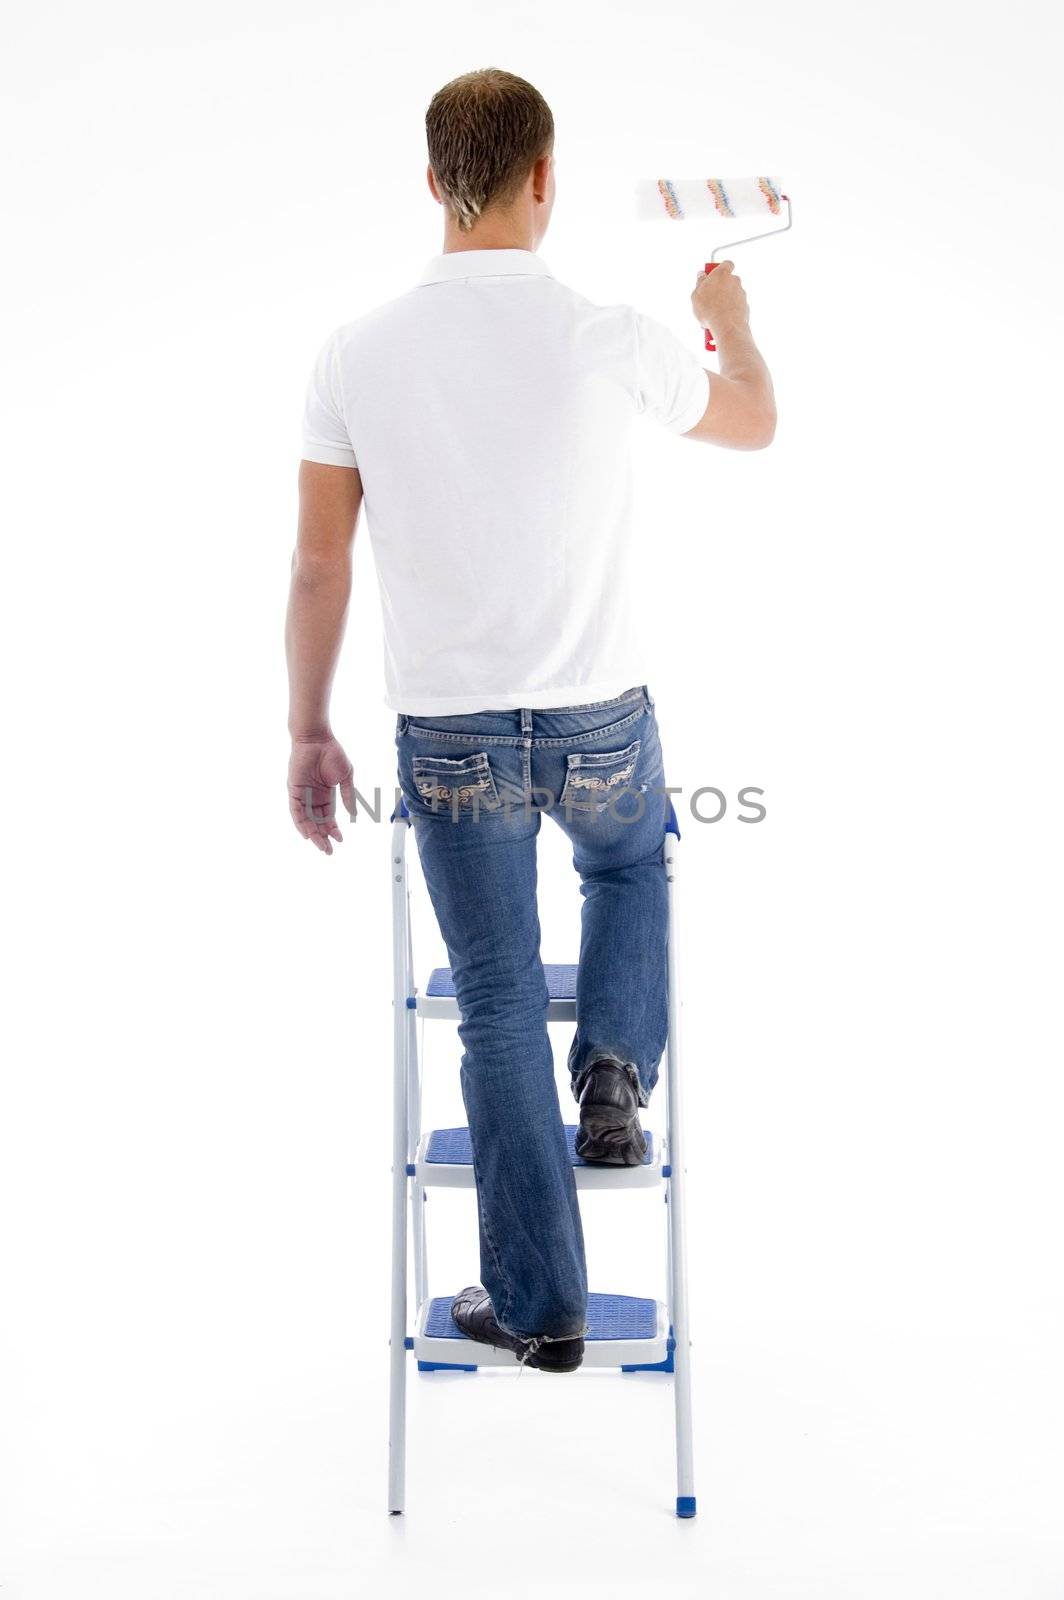 painter standing on stairs on an isolated white background